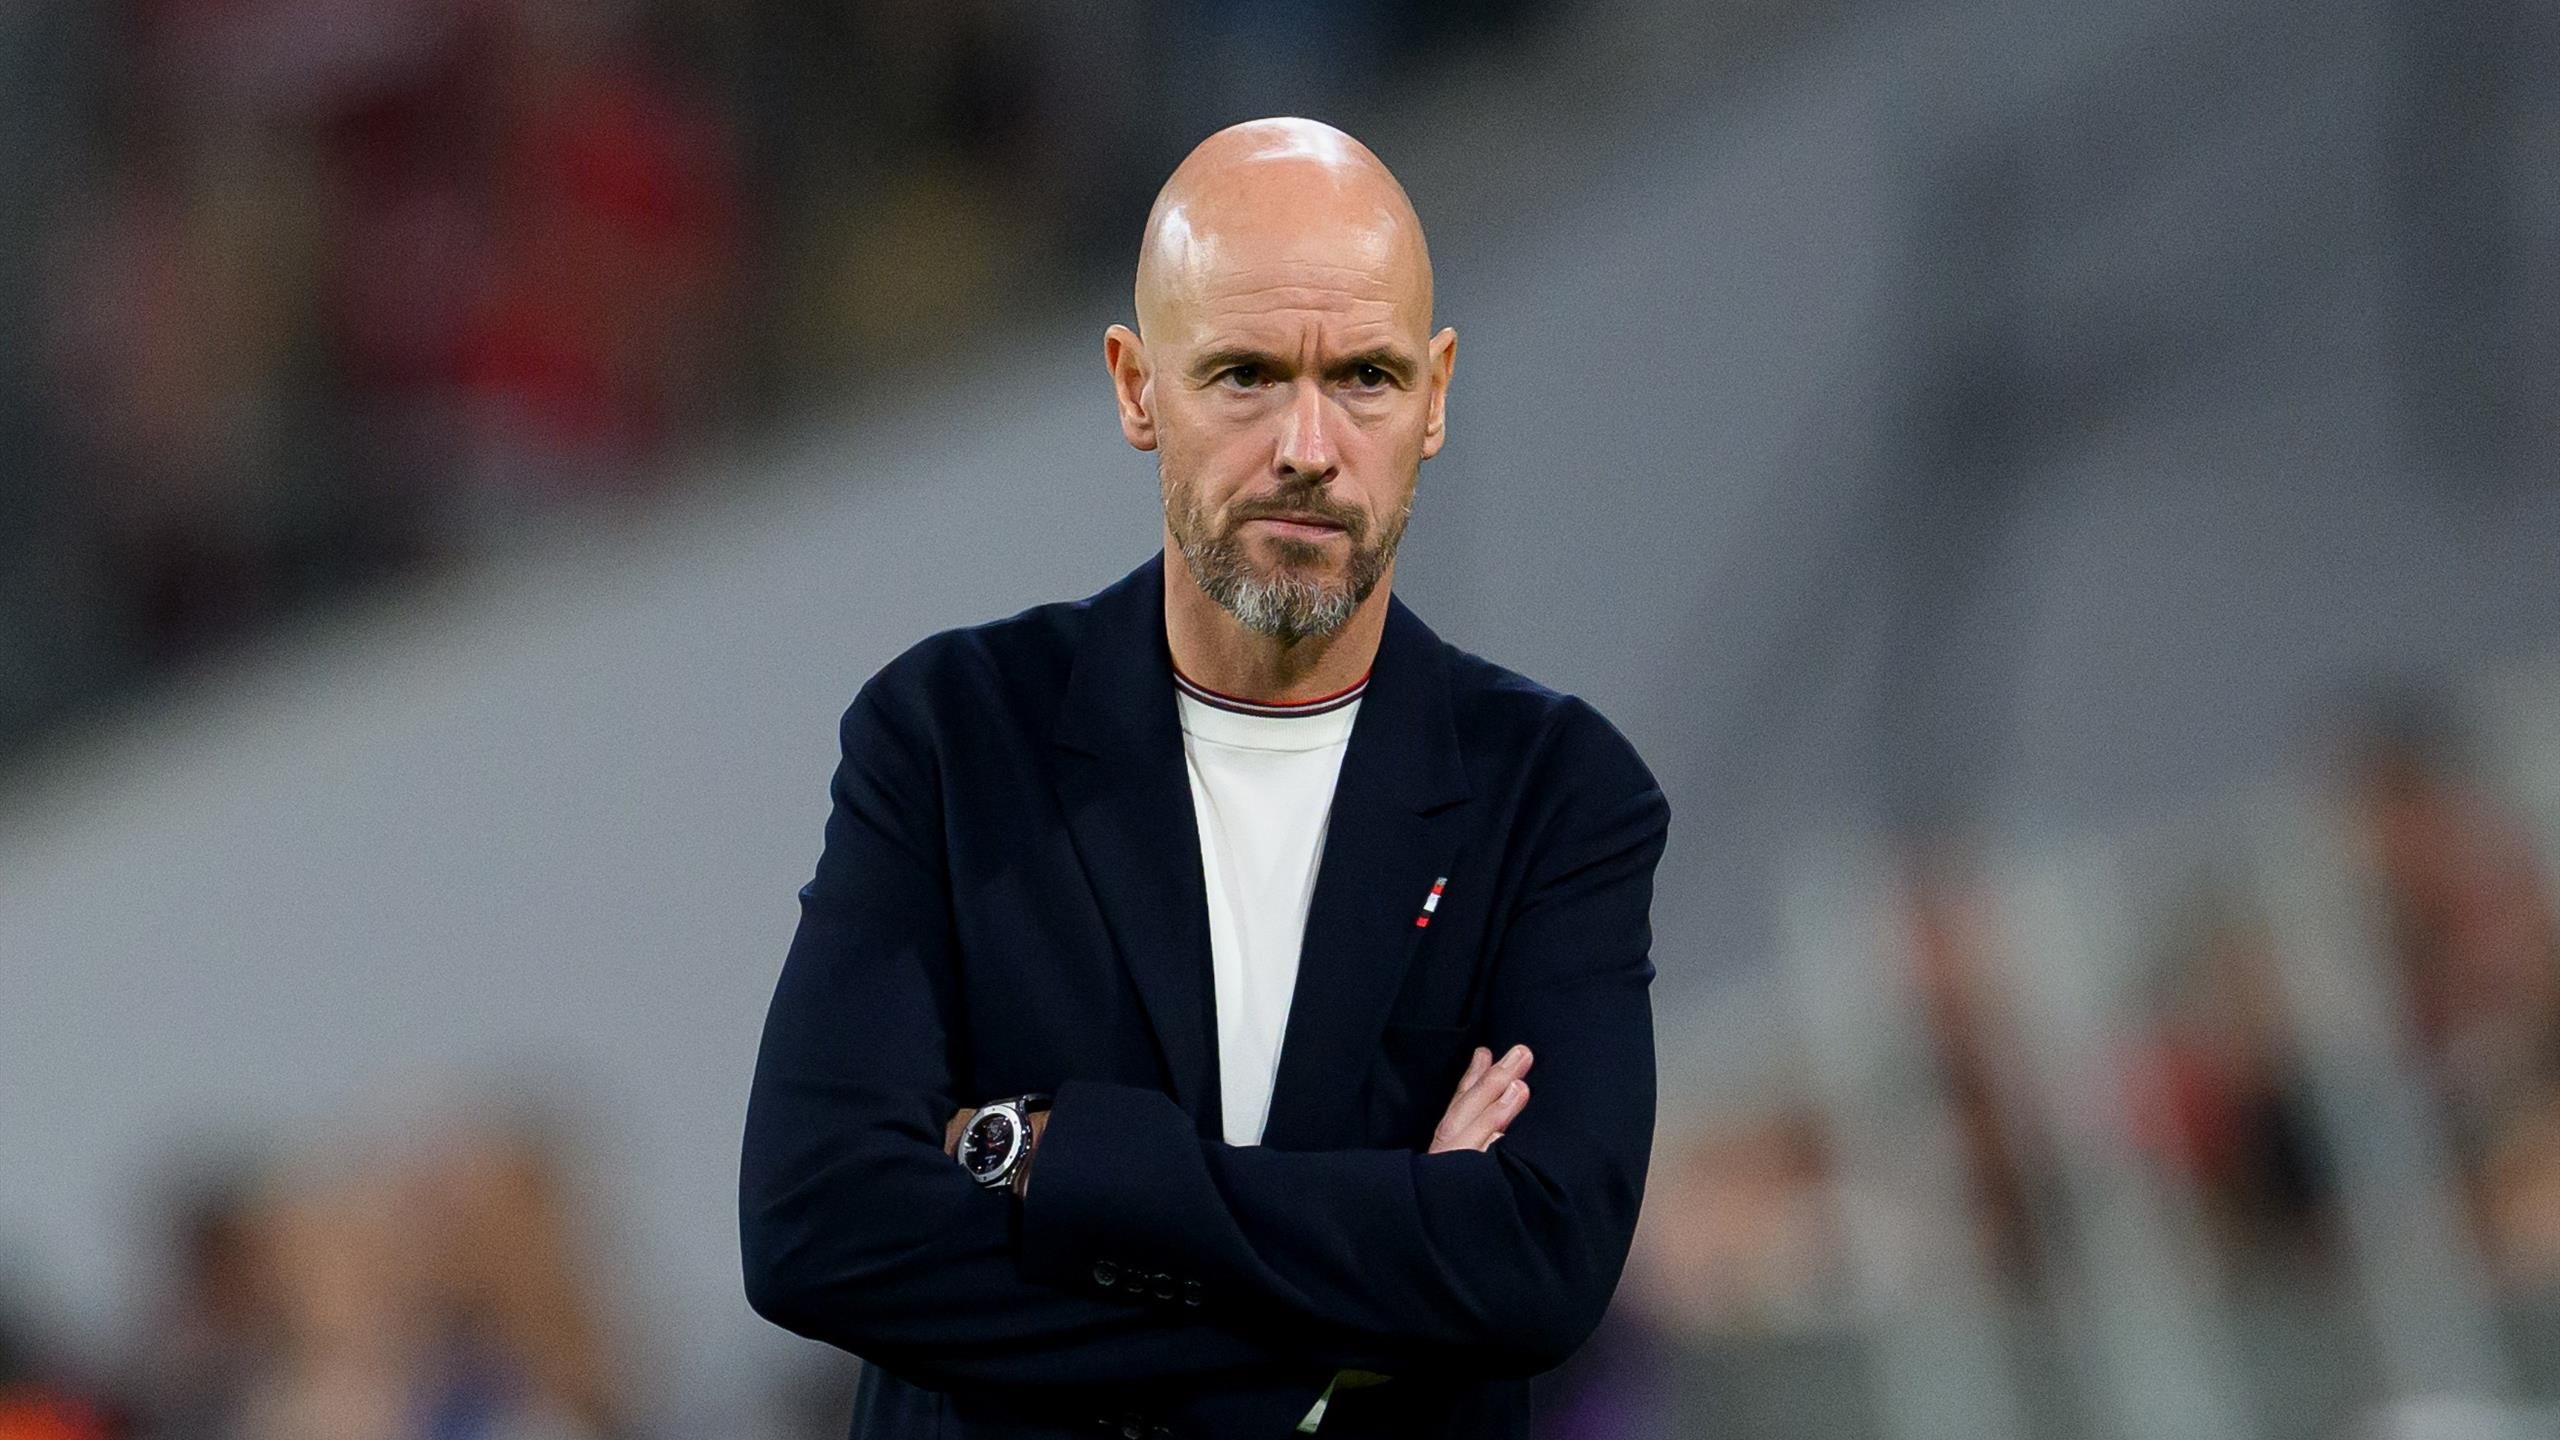 Exclusive: Erik ten Hag on importance of ‘togetherness’ ahead of Burnley clash – ‘Everyone is important’ – Eurosport